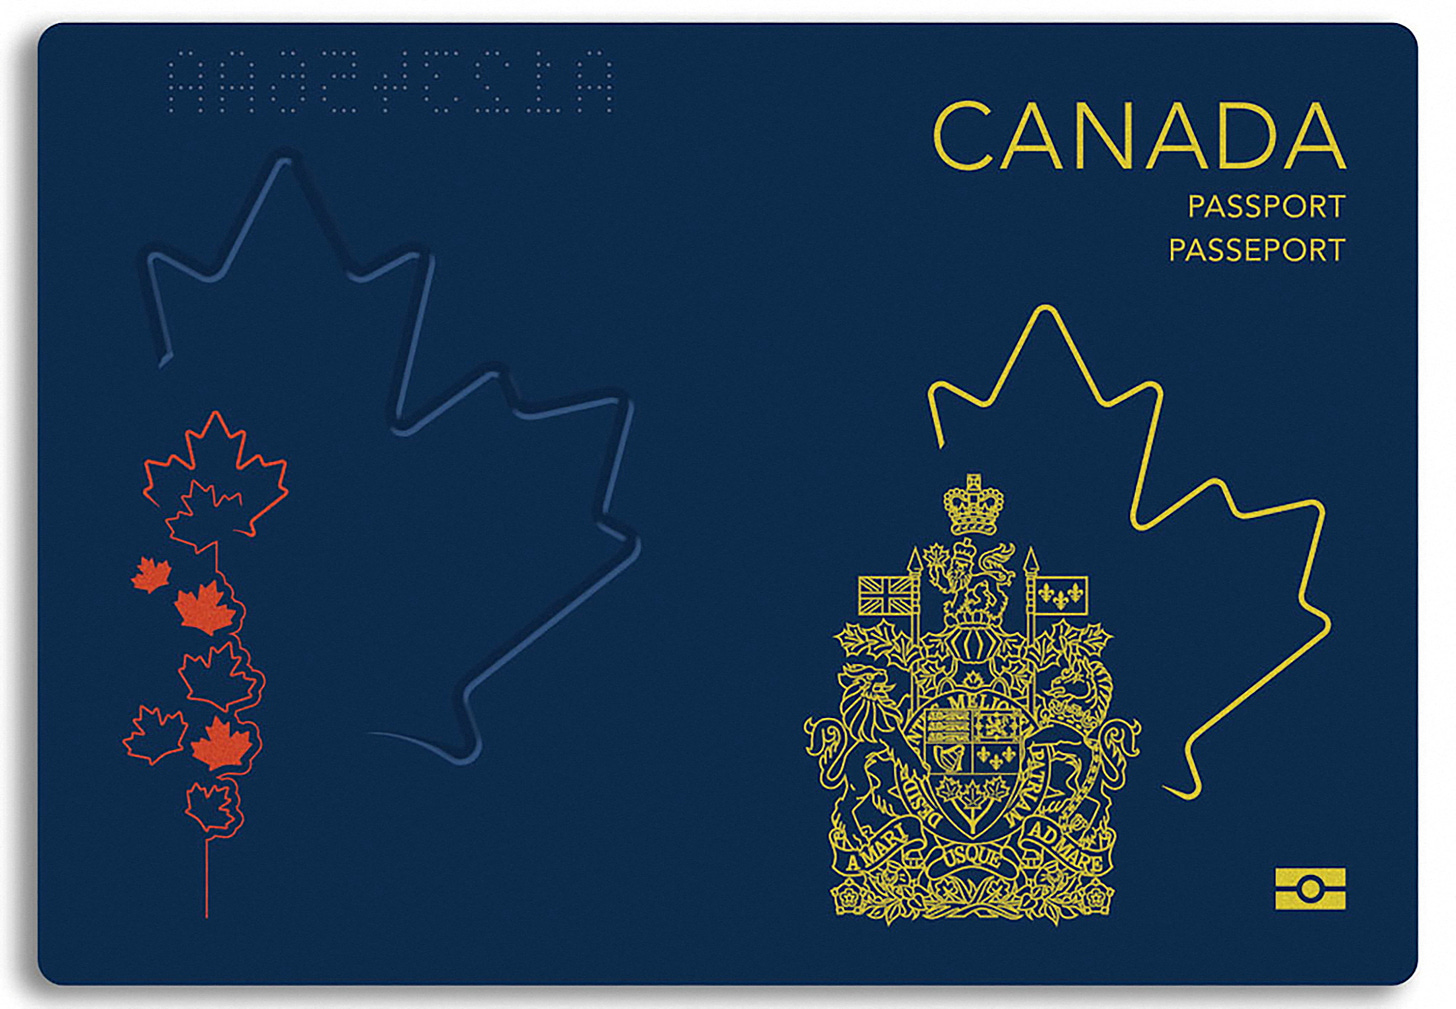 Canada unveils new passport design with more security ...